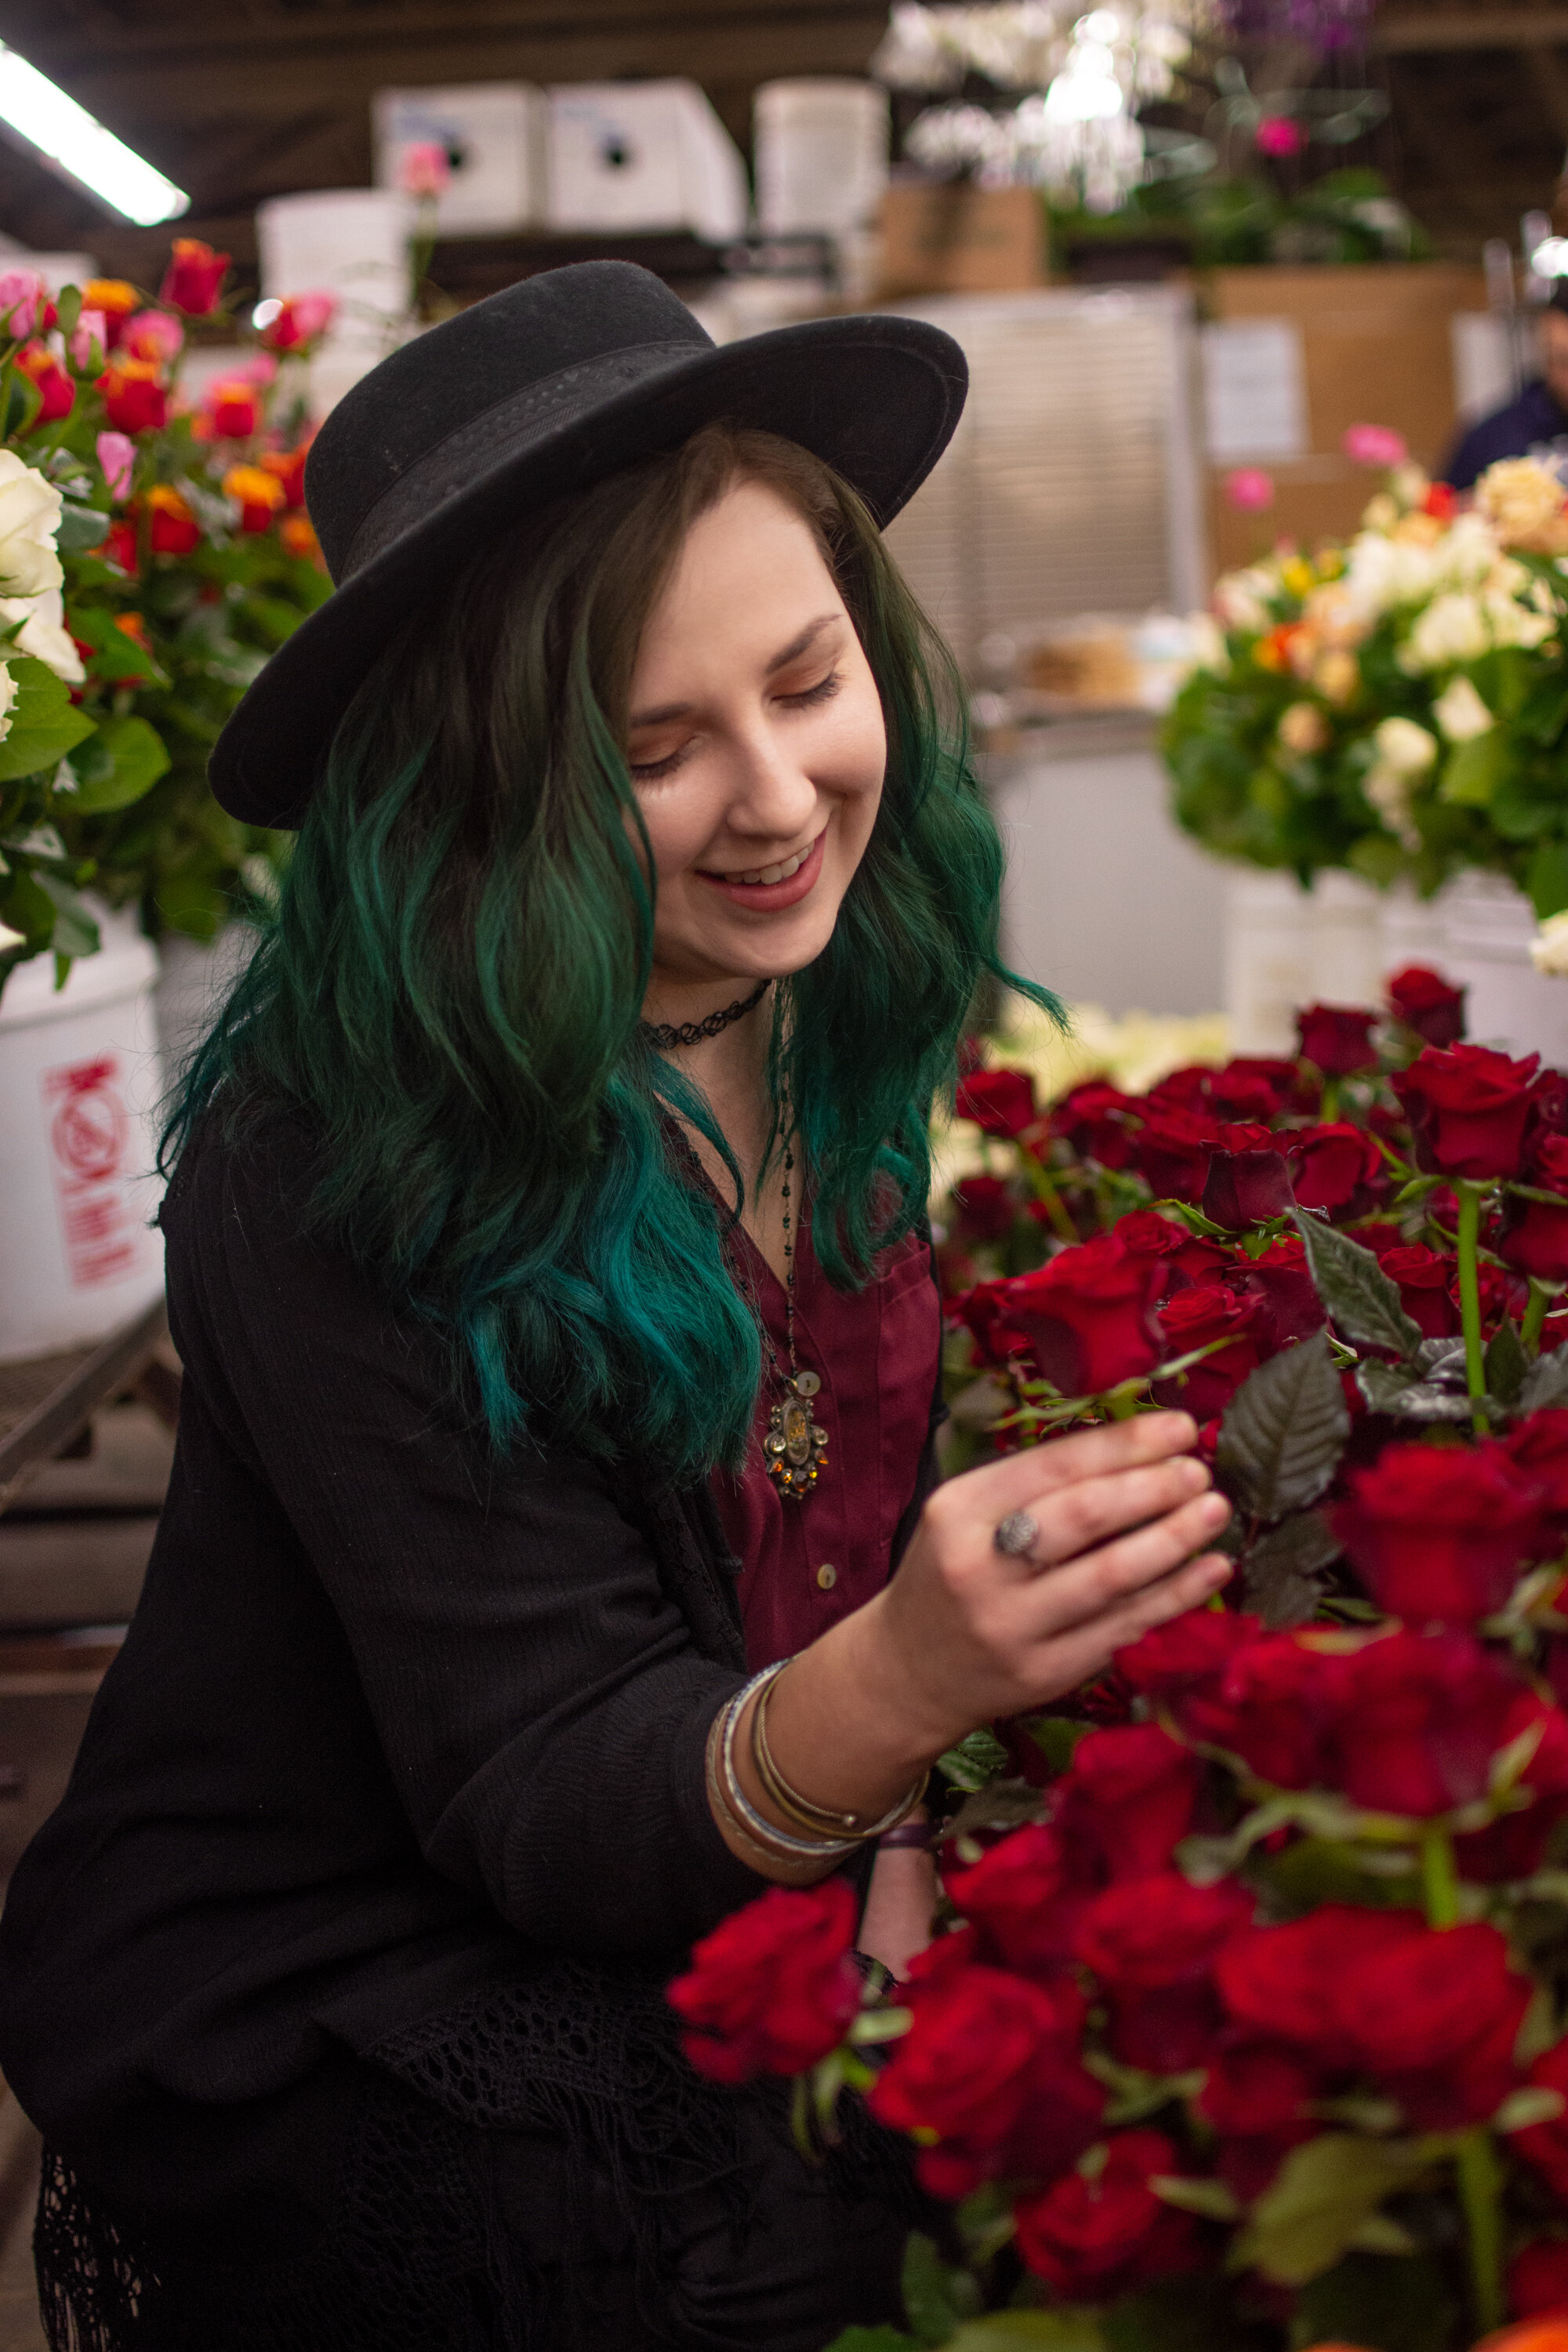 Florist in hat with red roses